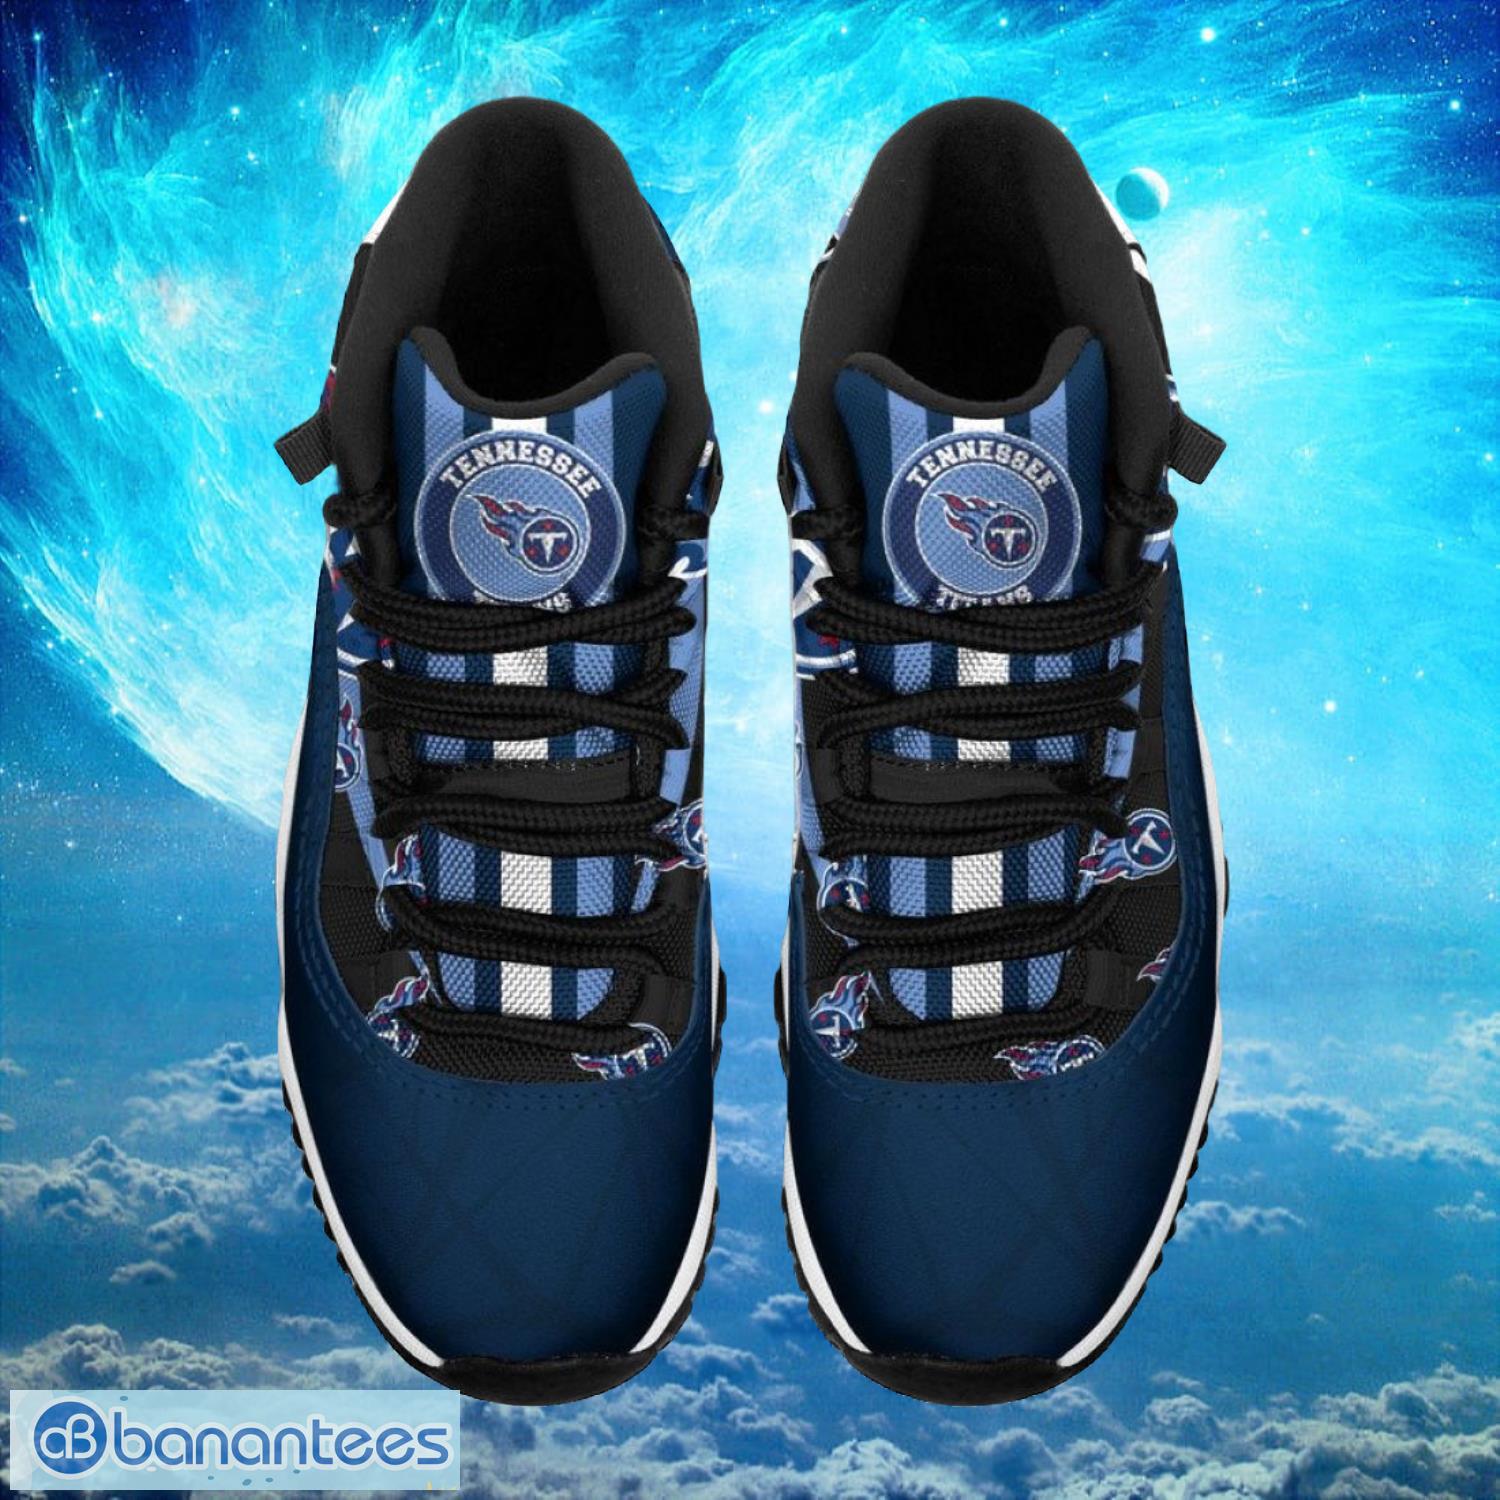 Tennessee Titans NFL Air Jordan 11 Sneakers Shoes Gift For Fans Product Photo 2